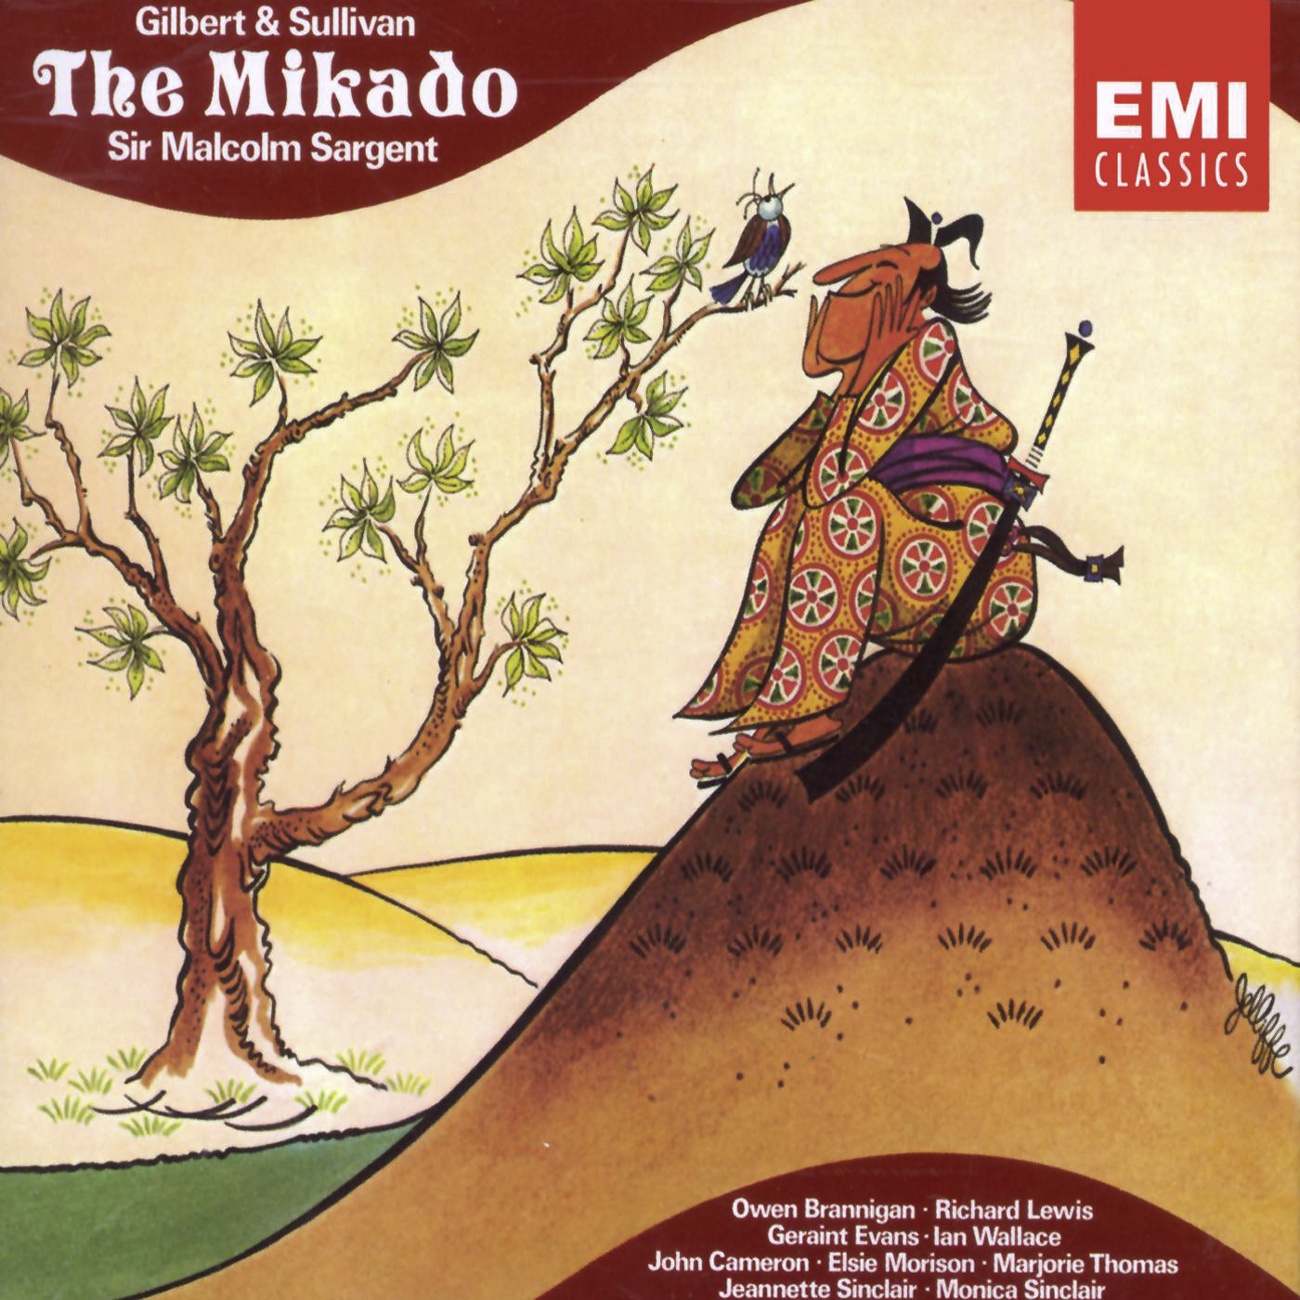 The Mikado (or, The Town of Titipu), Act I: Your revels cease (Katisha, Nanki-Poo, Pitti-Sing, Yum-Yum, Others)